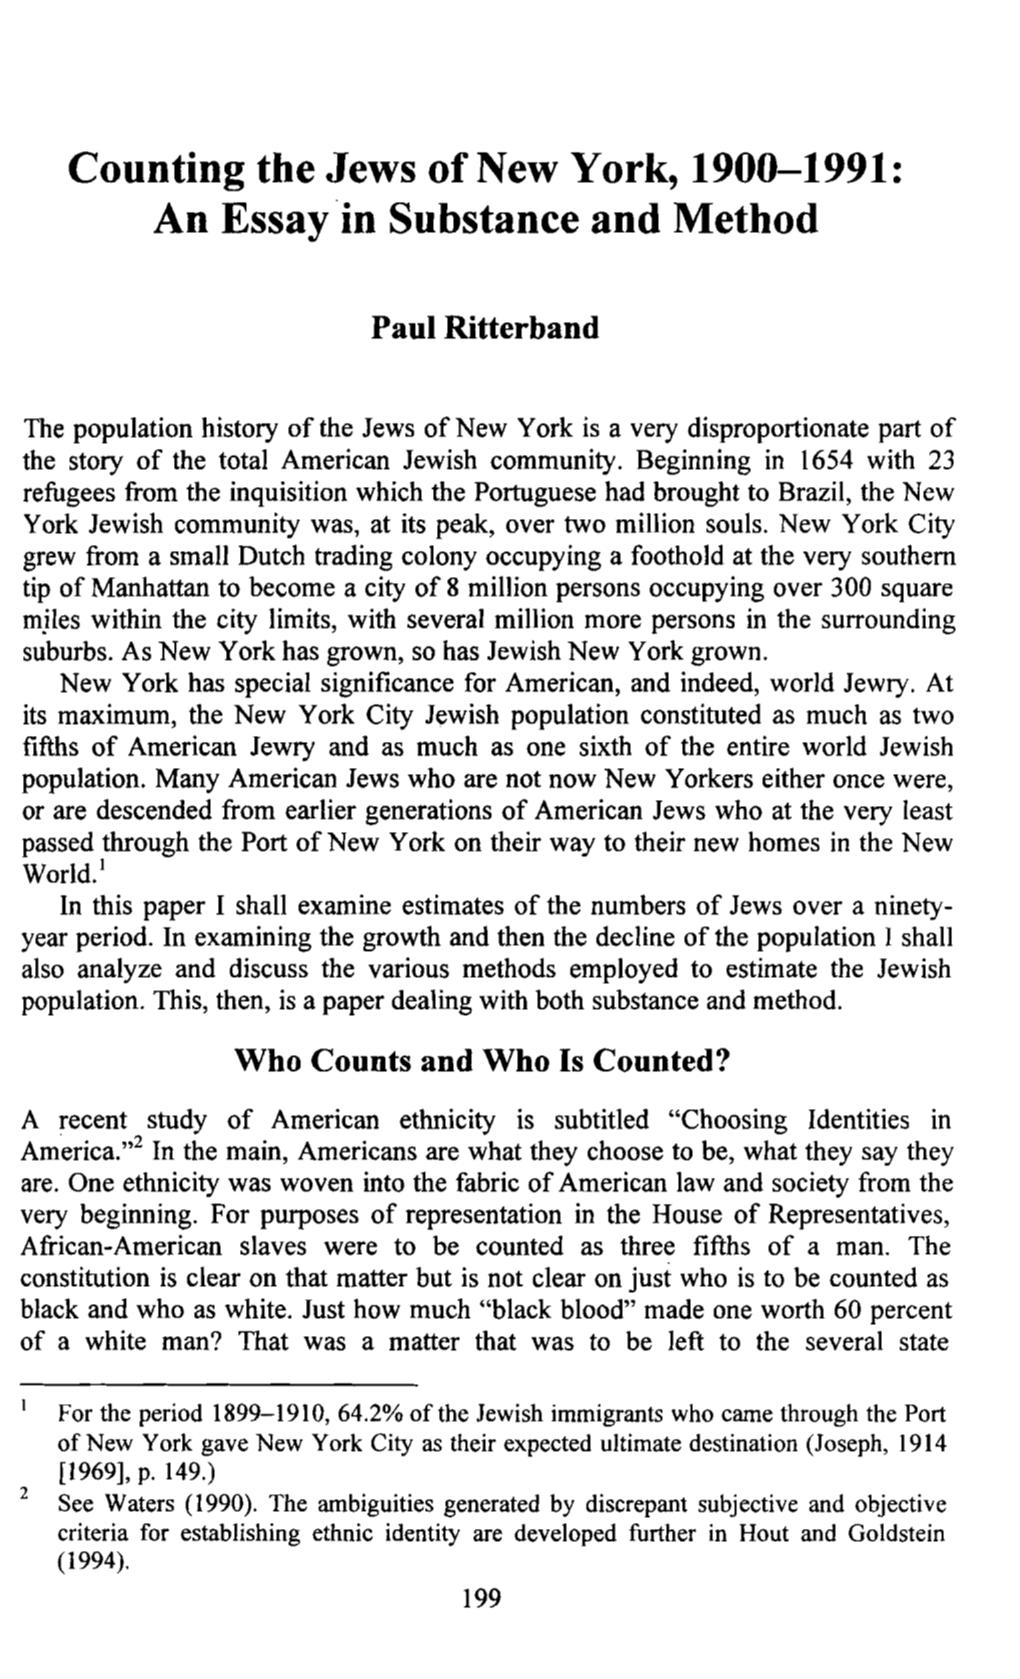 Counting the Jews of New York, 1900-1991: an Essay in Substance